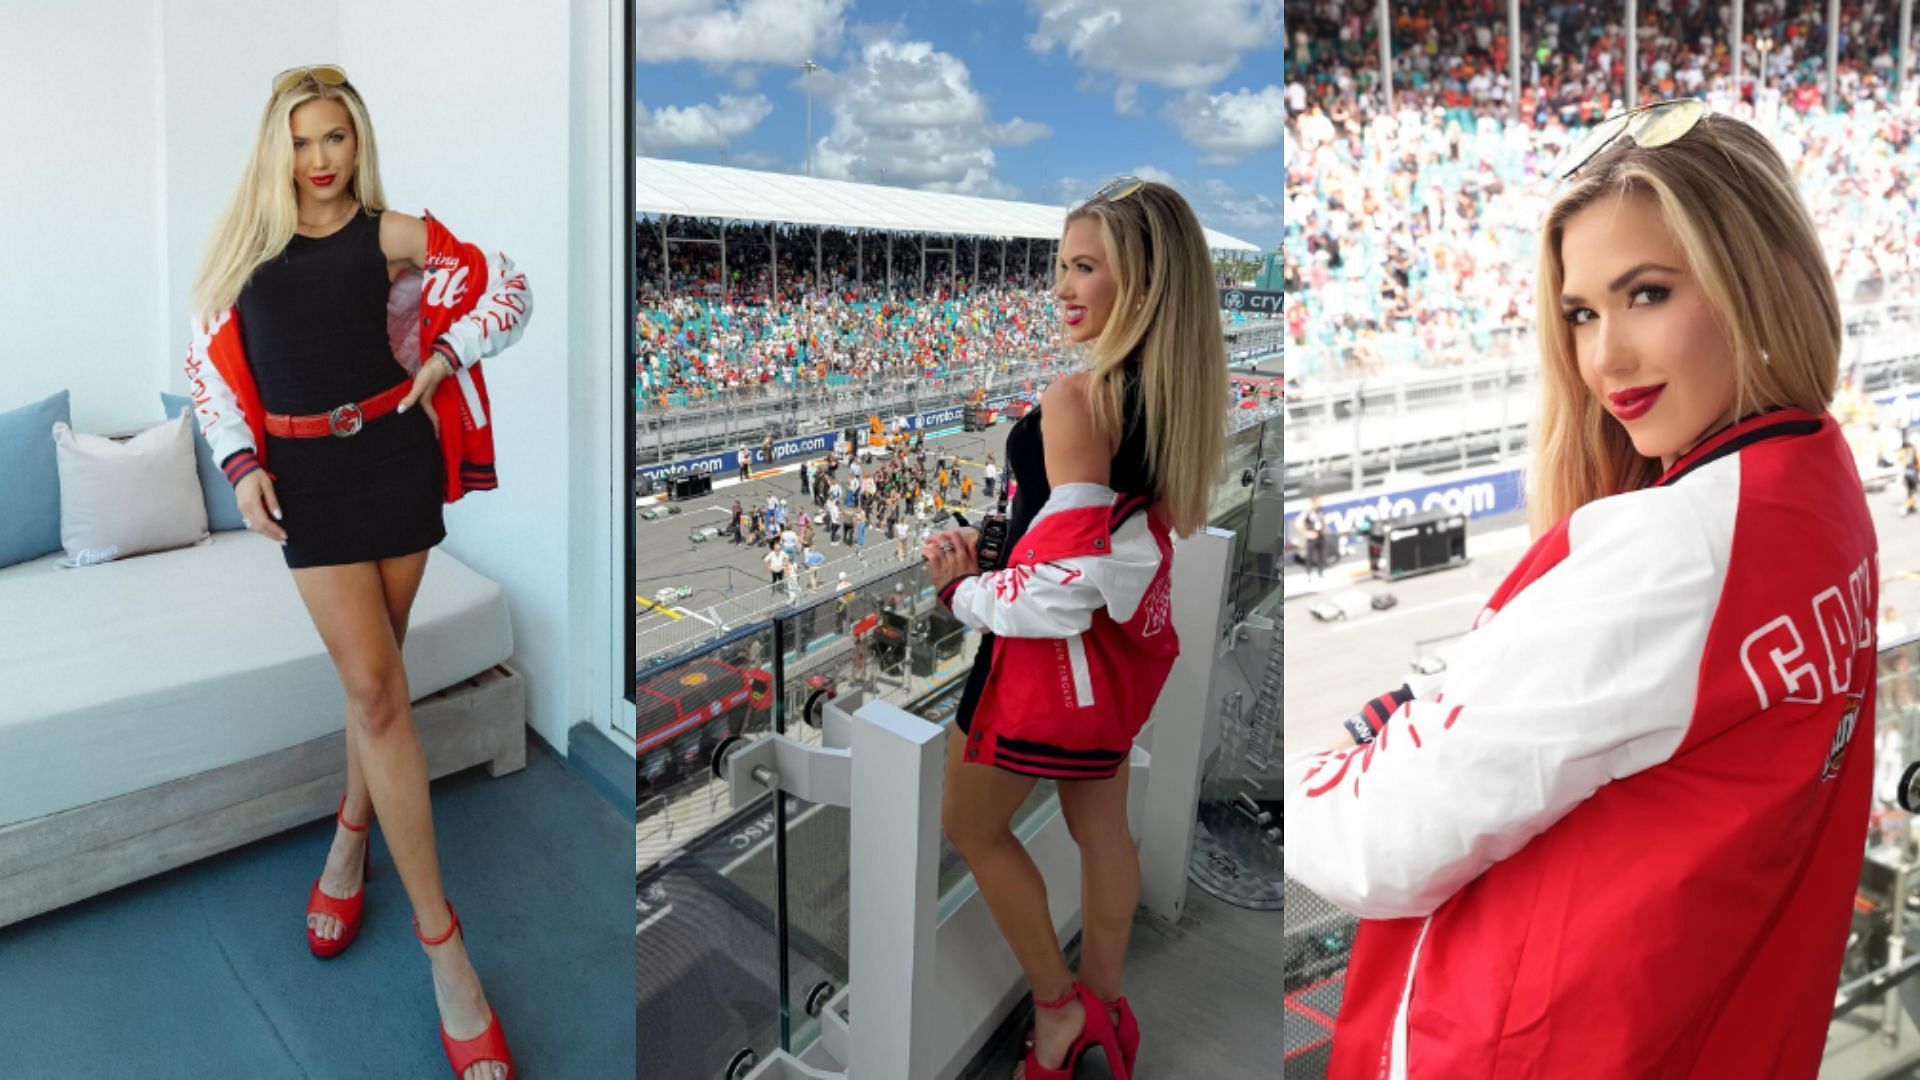 Photos of Gracie taking in the F1 race from the Raising Cane's suite.